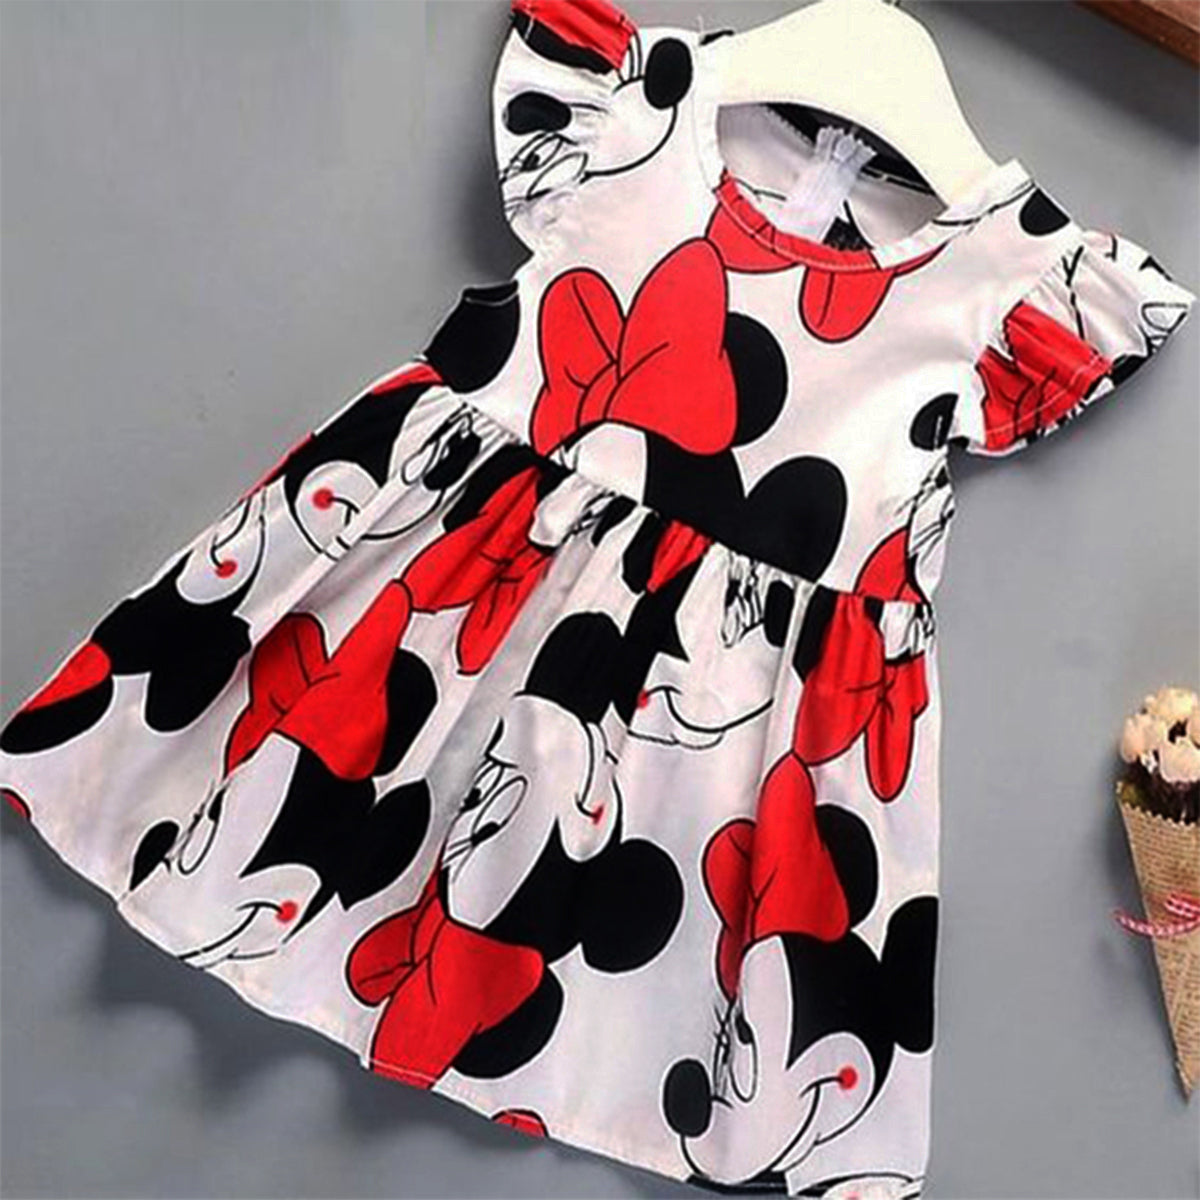 Princess BabyGirl's Stylish Cartoon Designers & Ice Candy Tunic Dresses_Frocks (Combo Pack Of 2) for Baby Girls.